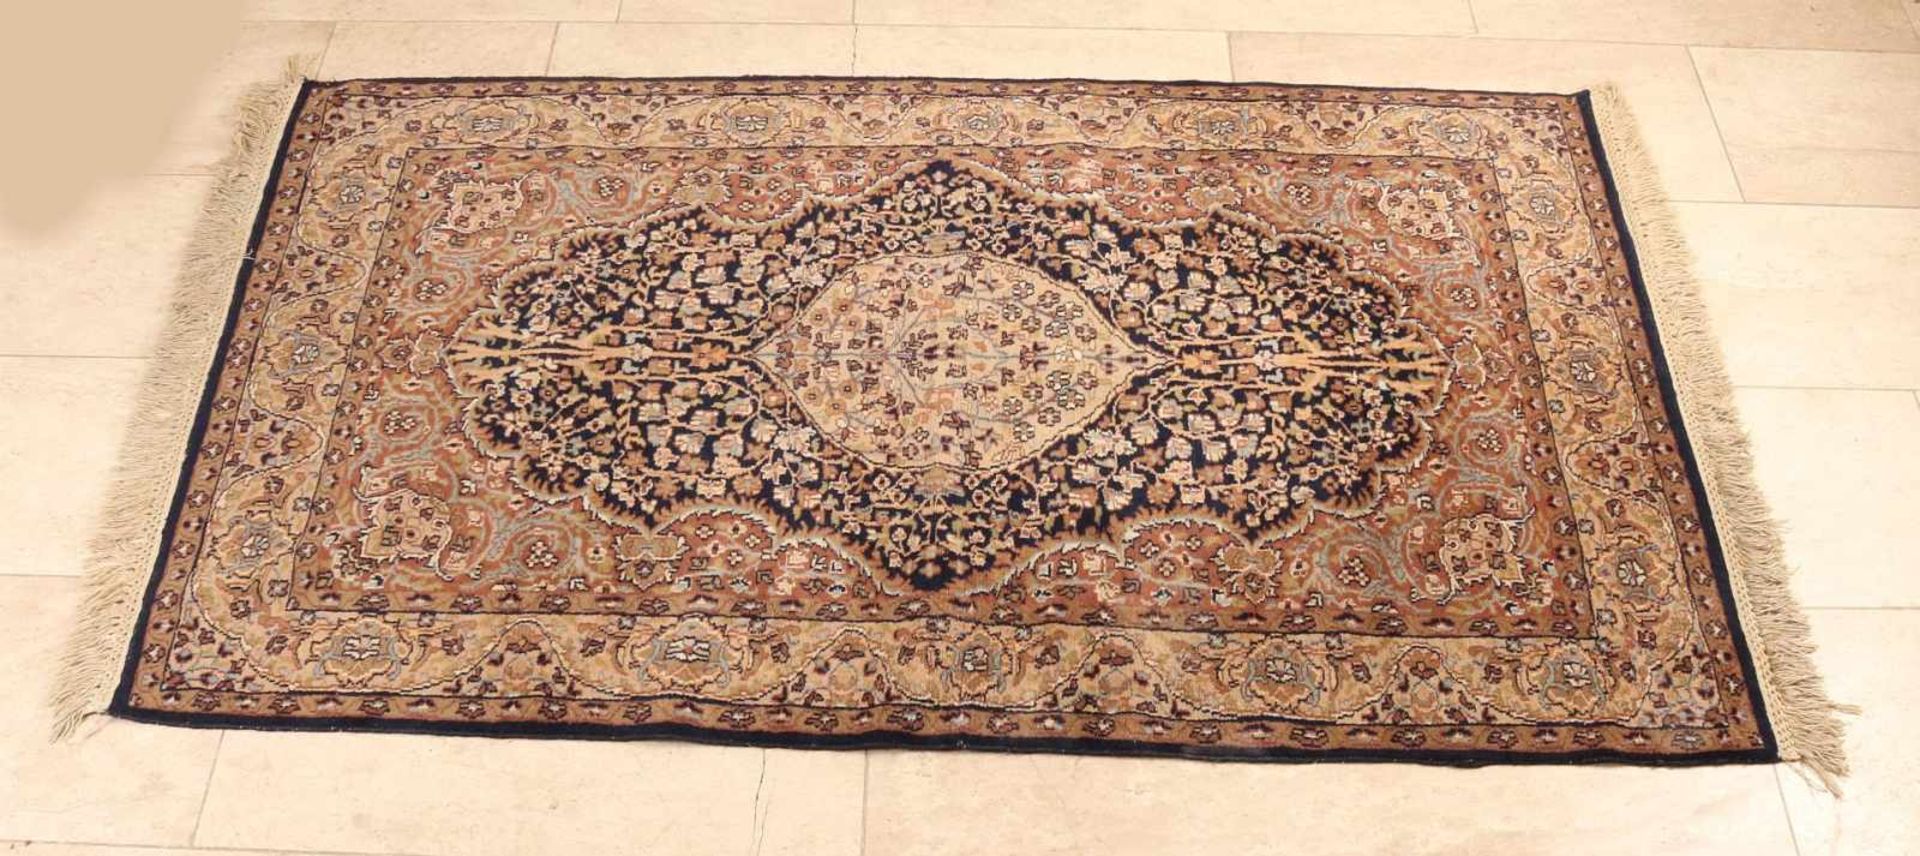 Persian garment in earth tones, finely drawn with floral decoration. Size: 100 x 160 cm. In good